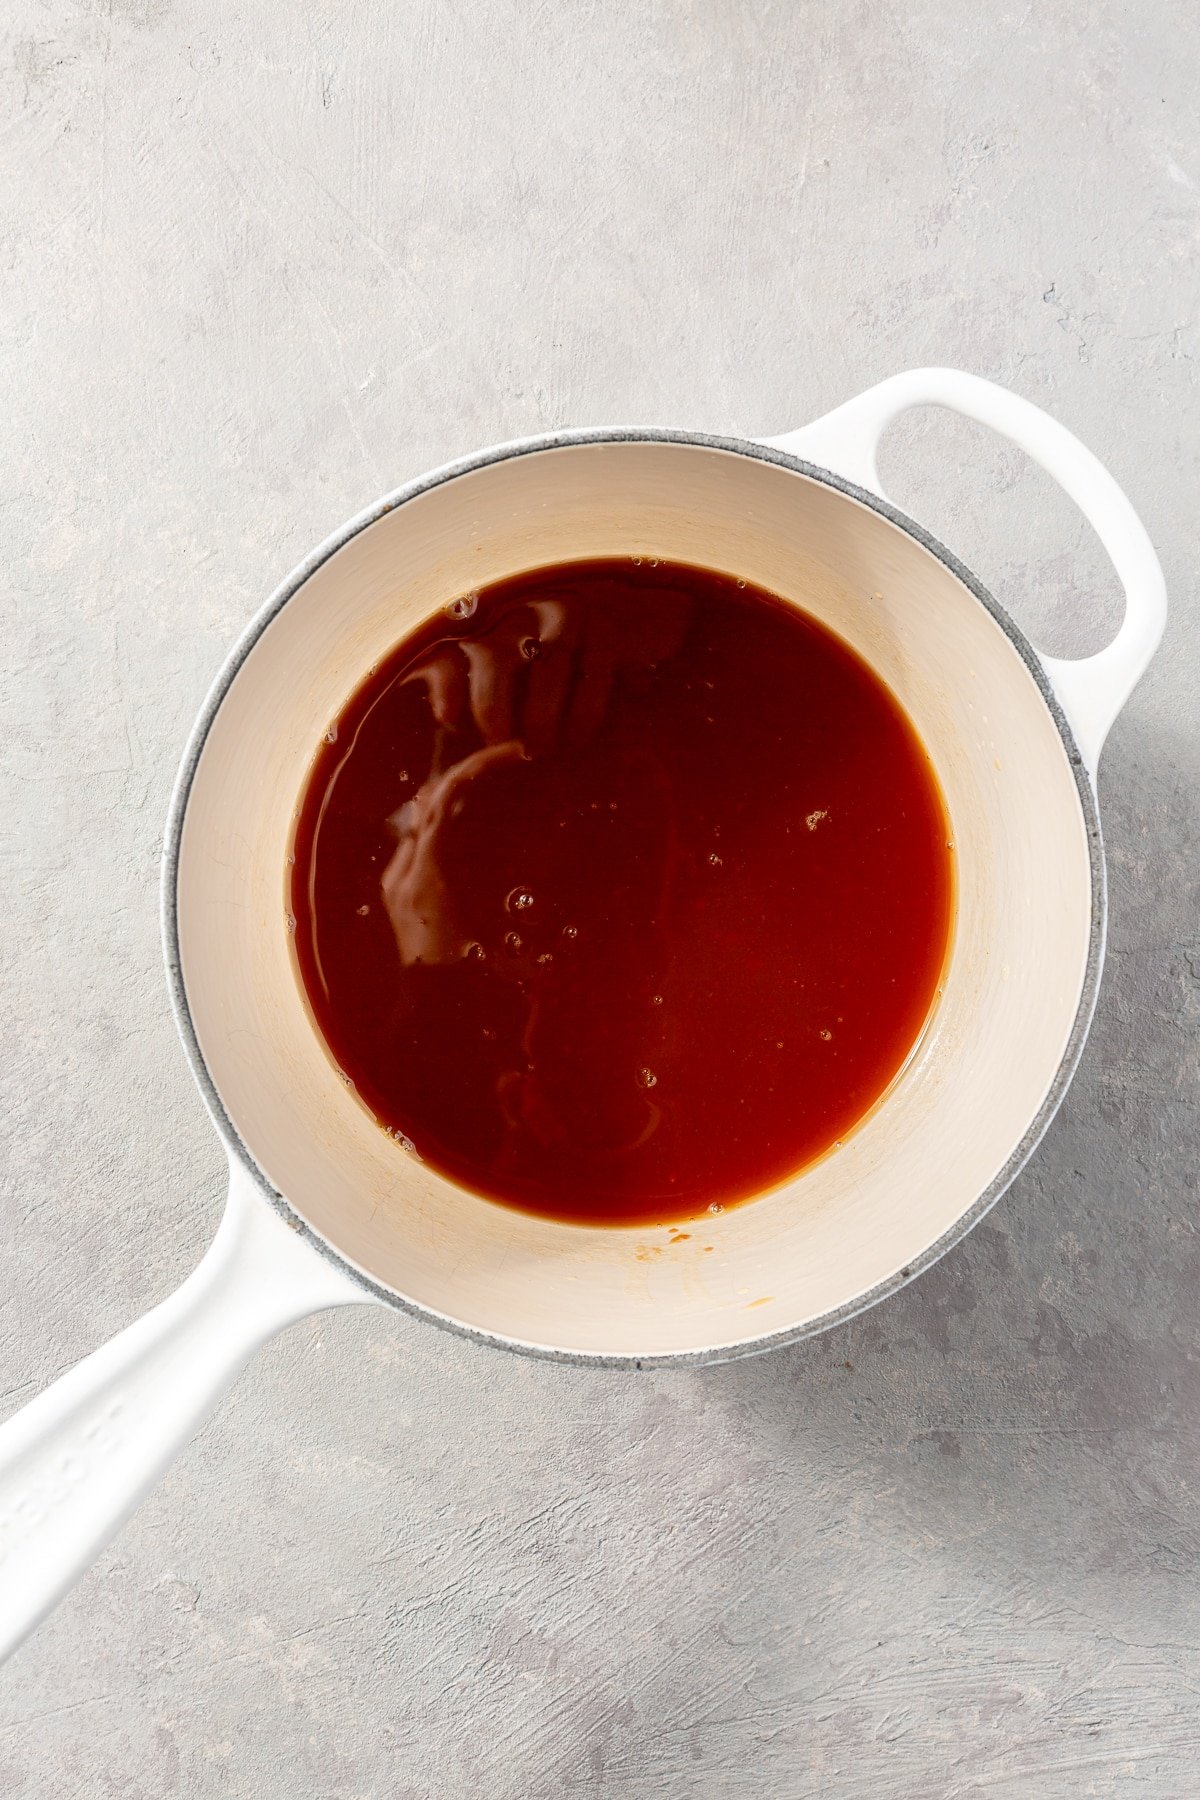 A dark red liquid sits in the bottom of a white pot.